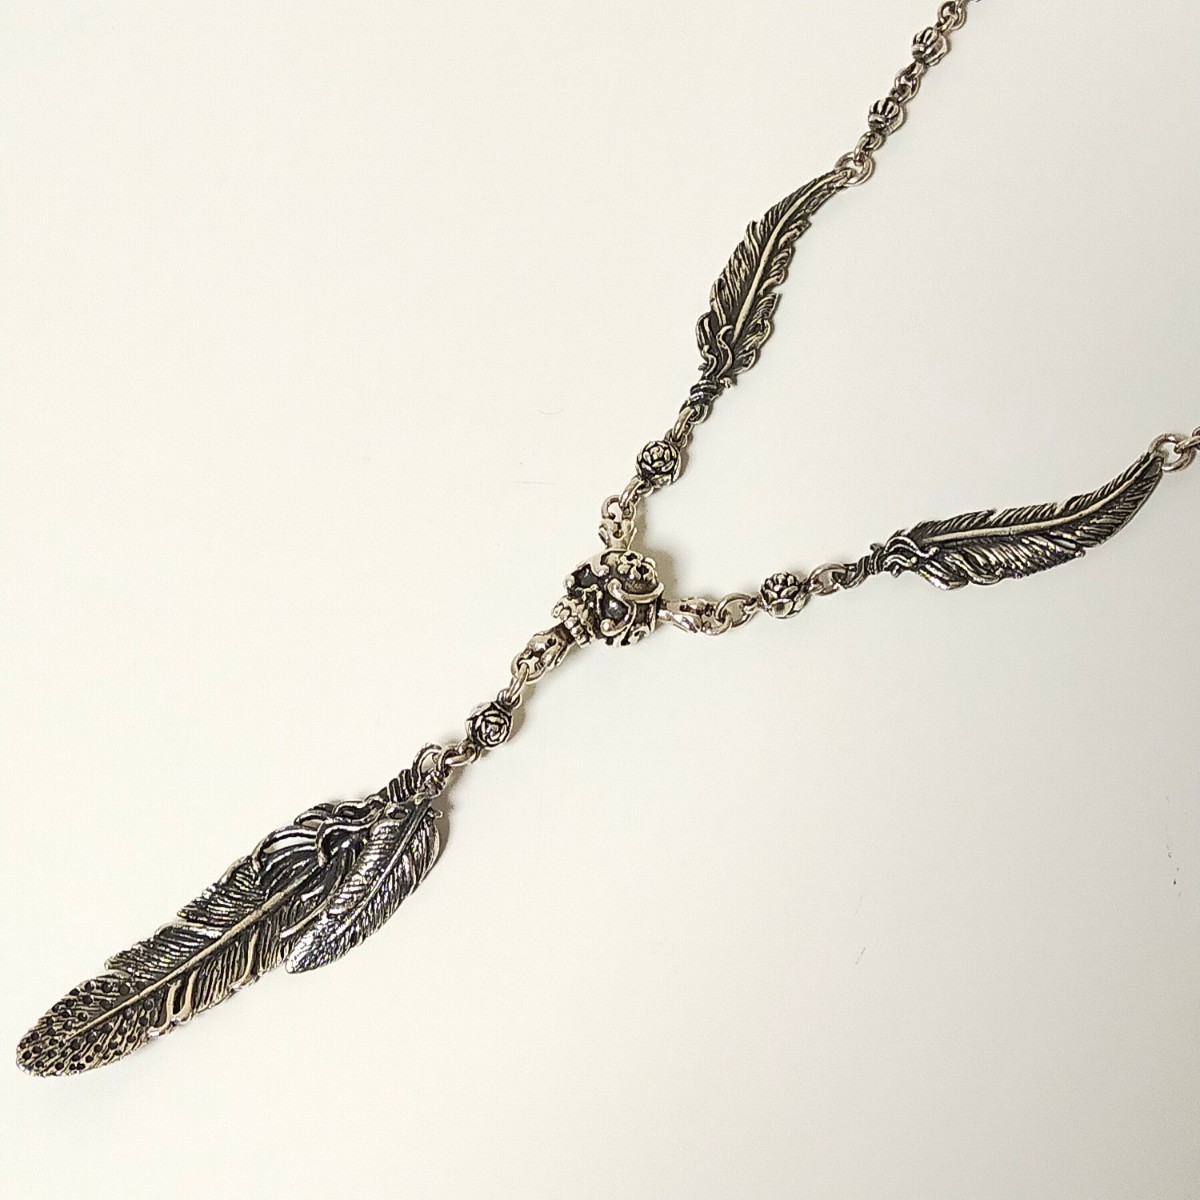 ROYALORDER ロイヤルオーダー 定価188,100円 SN519 CARVED SKULL & BONES WITH FEATHERS NECKLACE スカルボーン フェザー ネックレス 925